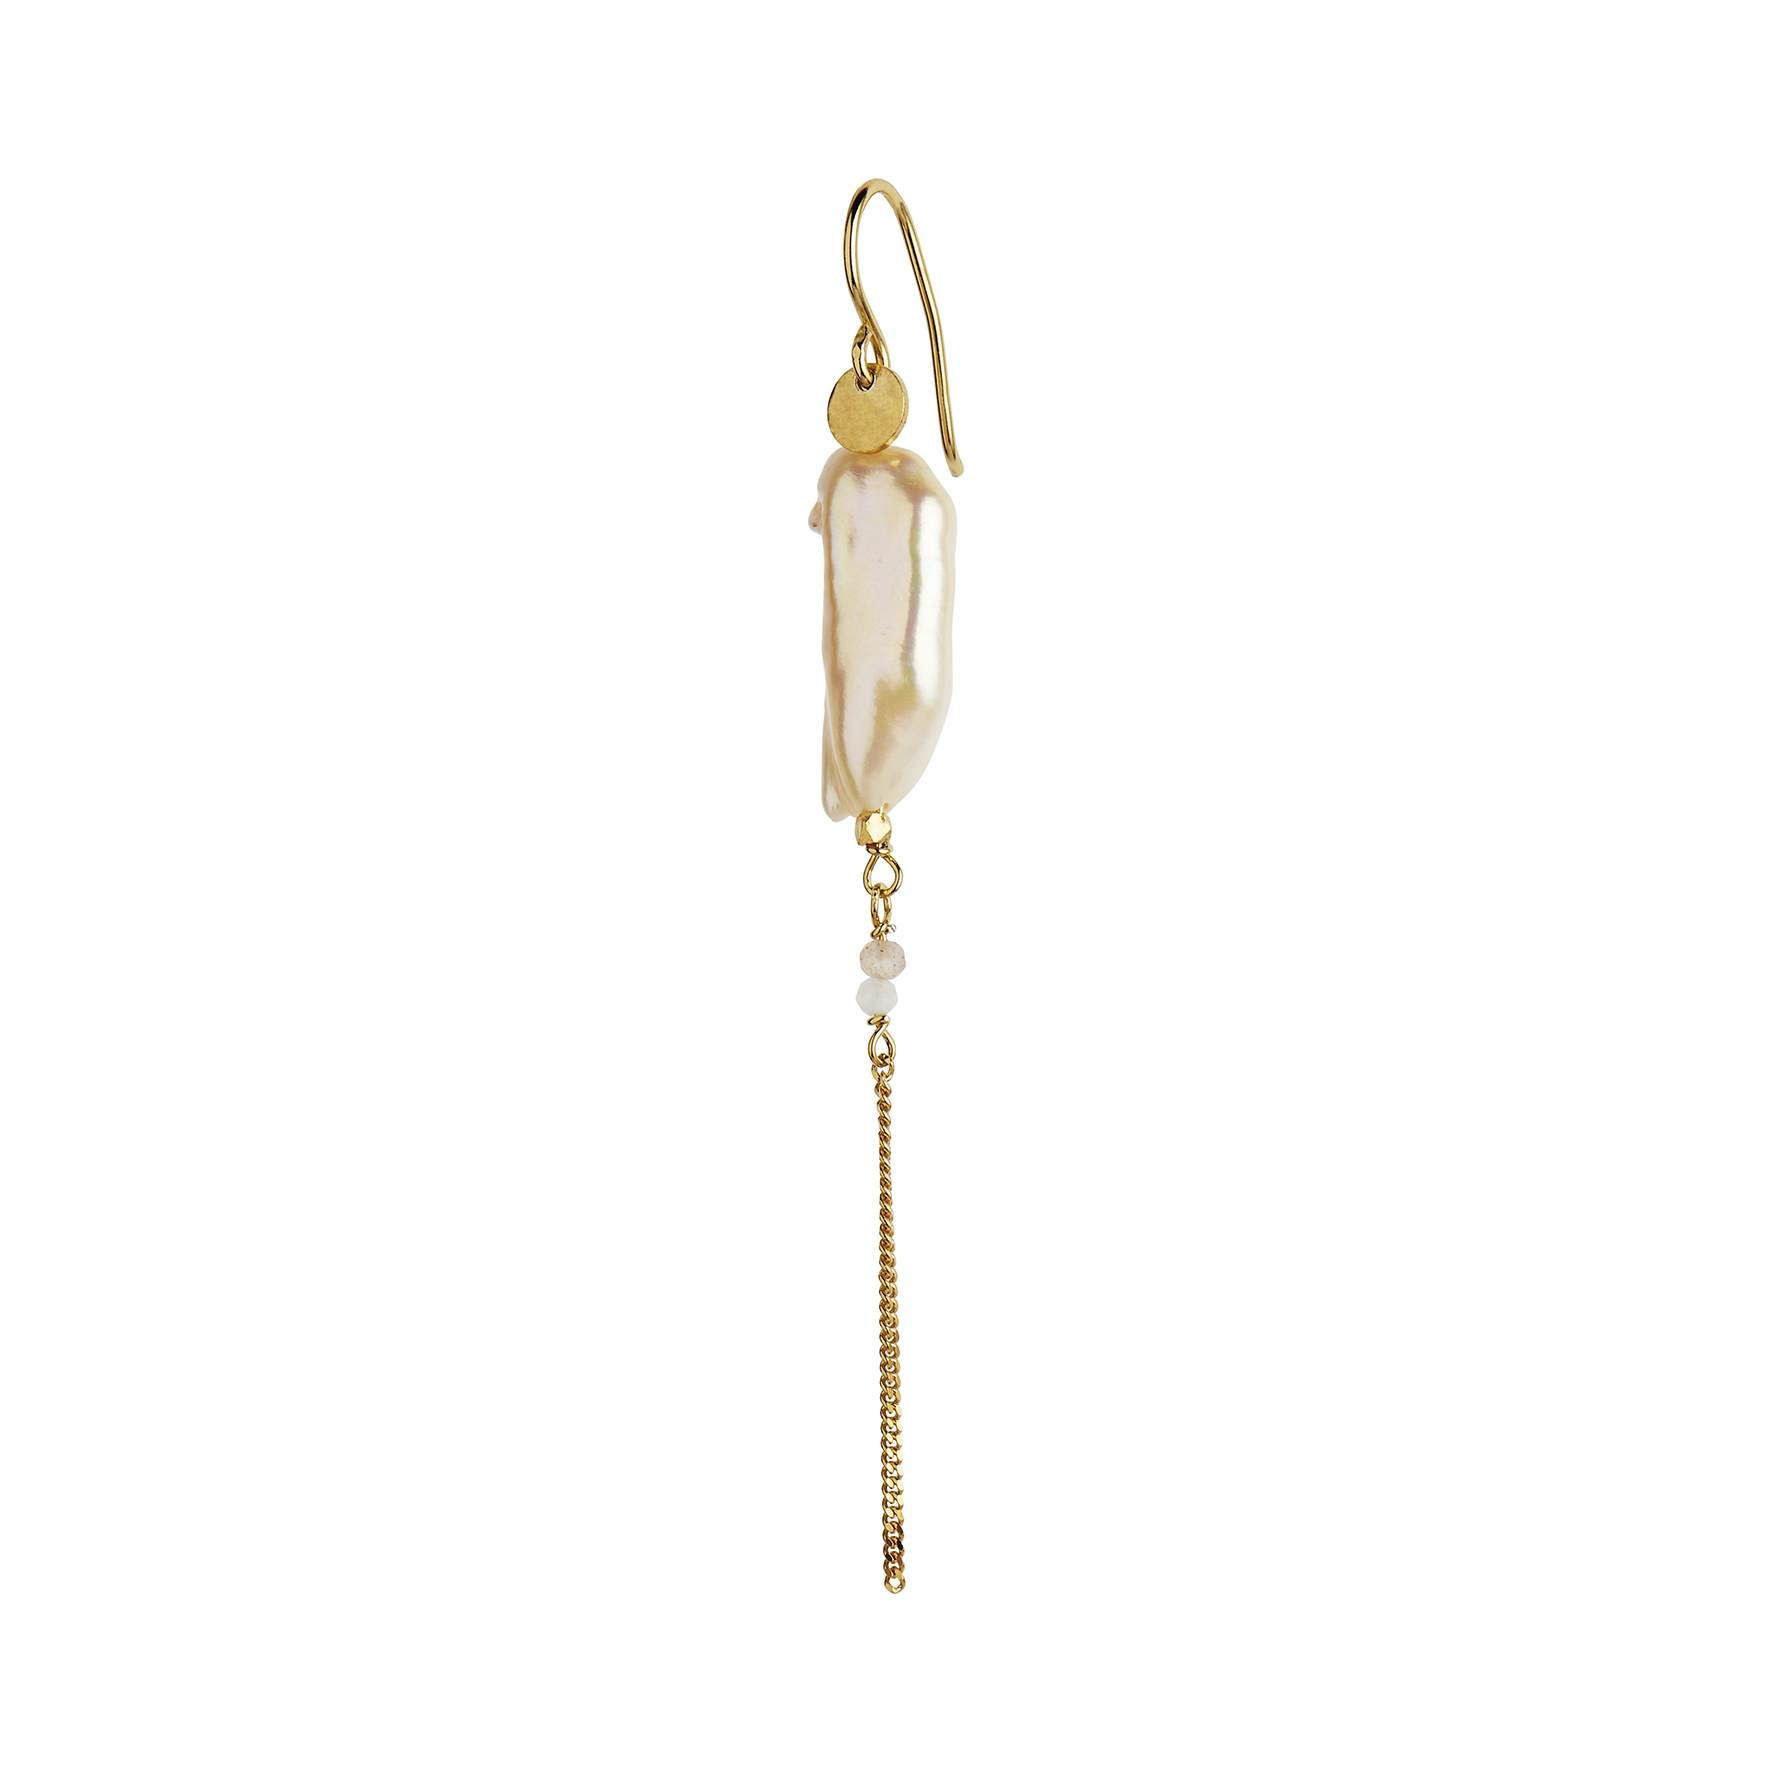 Long Baroque Pearl with Chain Earring Peach Sorbet fra STINE A Jewelry i Forgyldt-Sølv Sterling 925|Freshwater Pearl